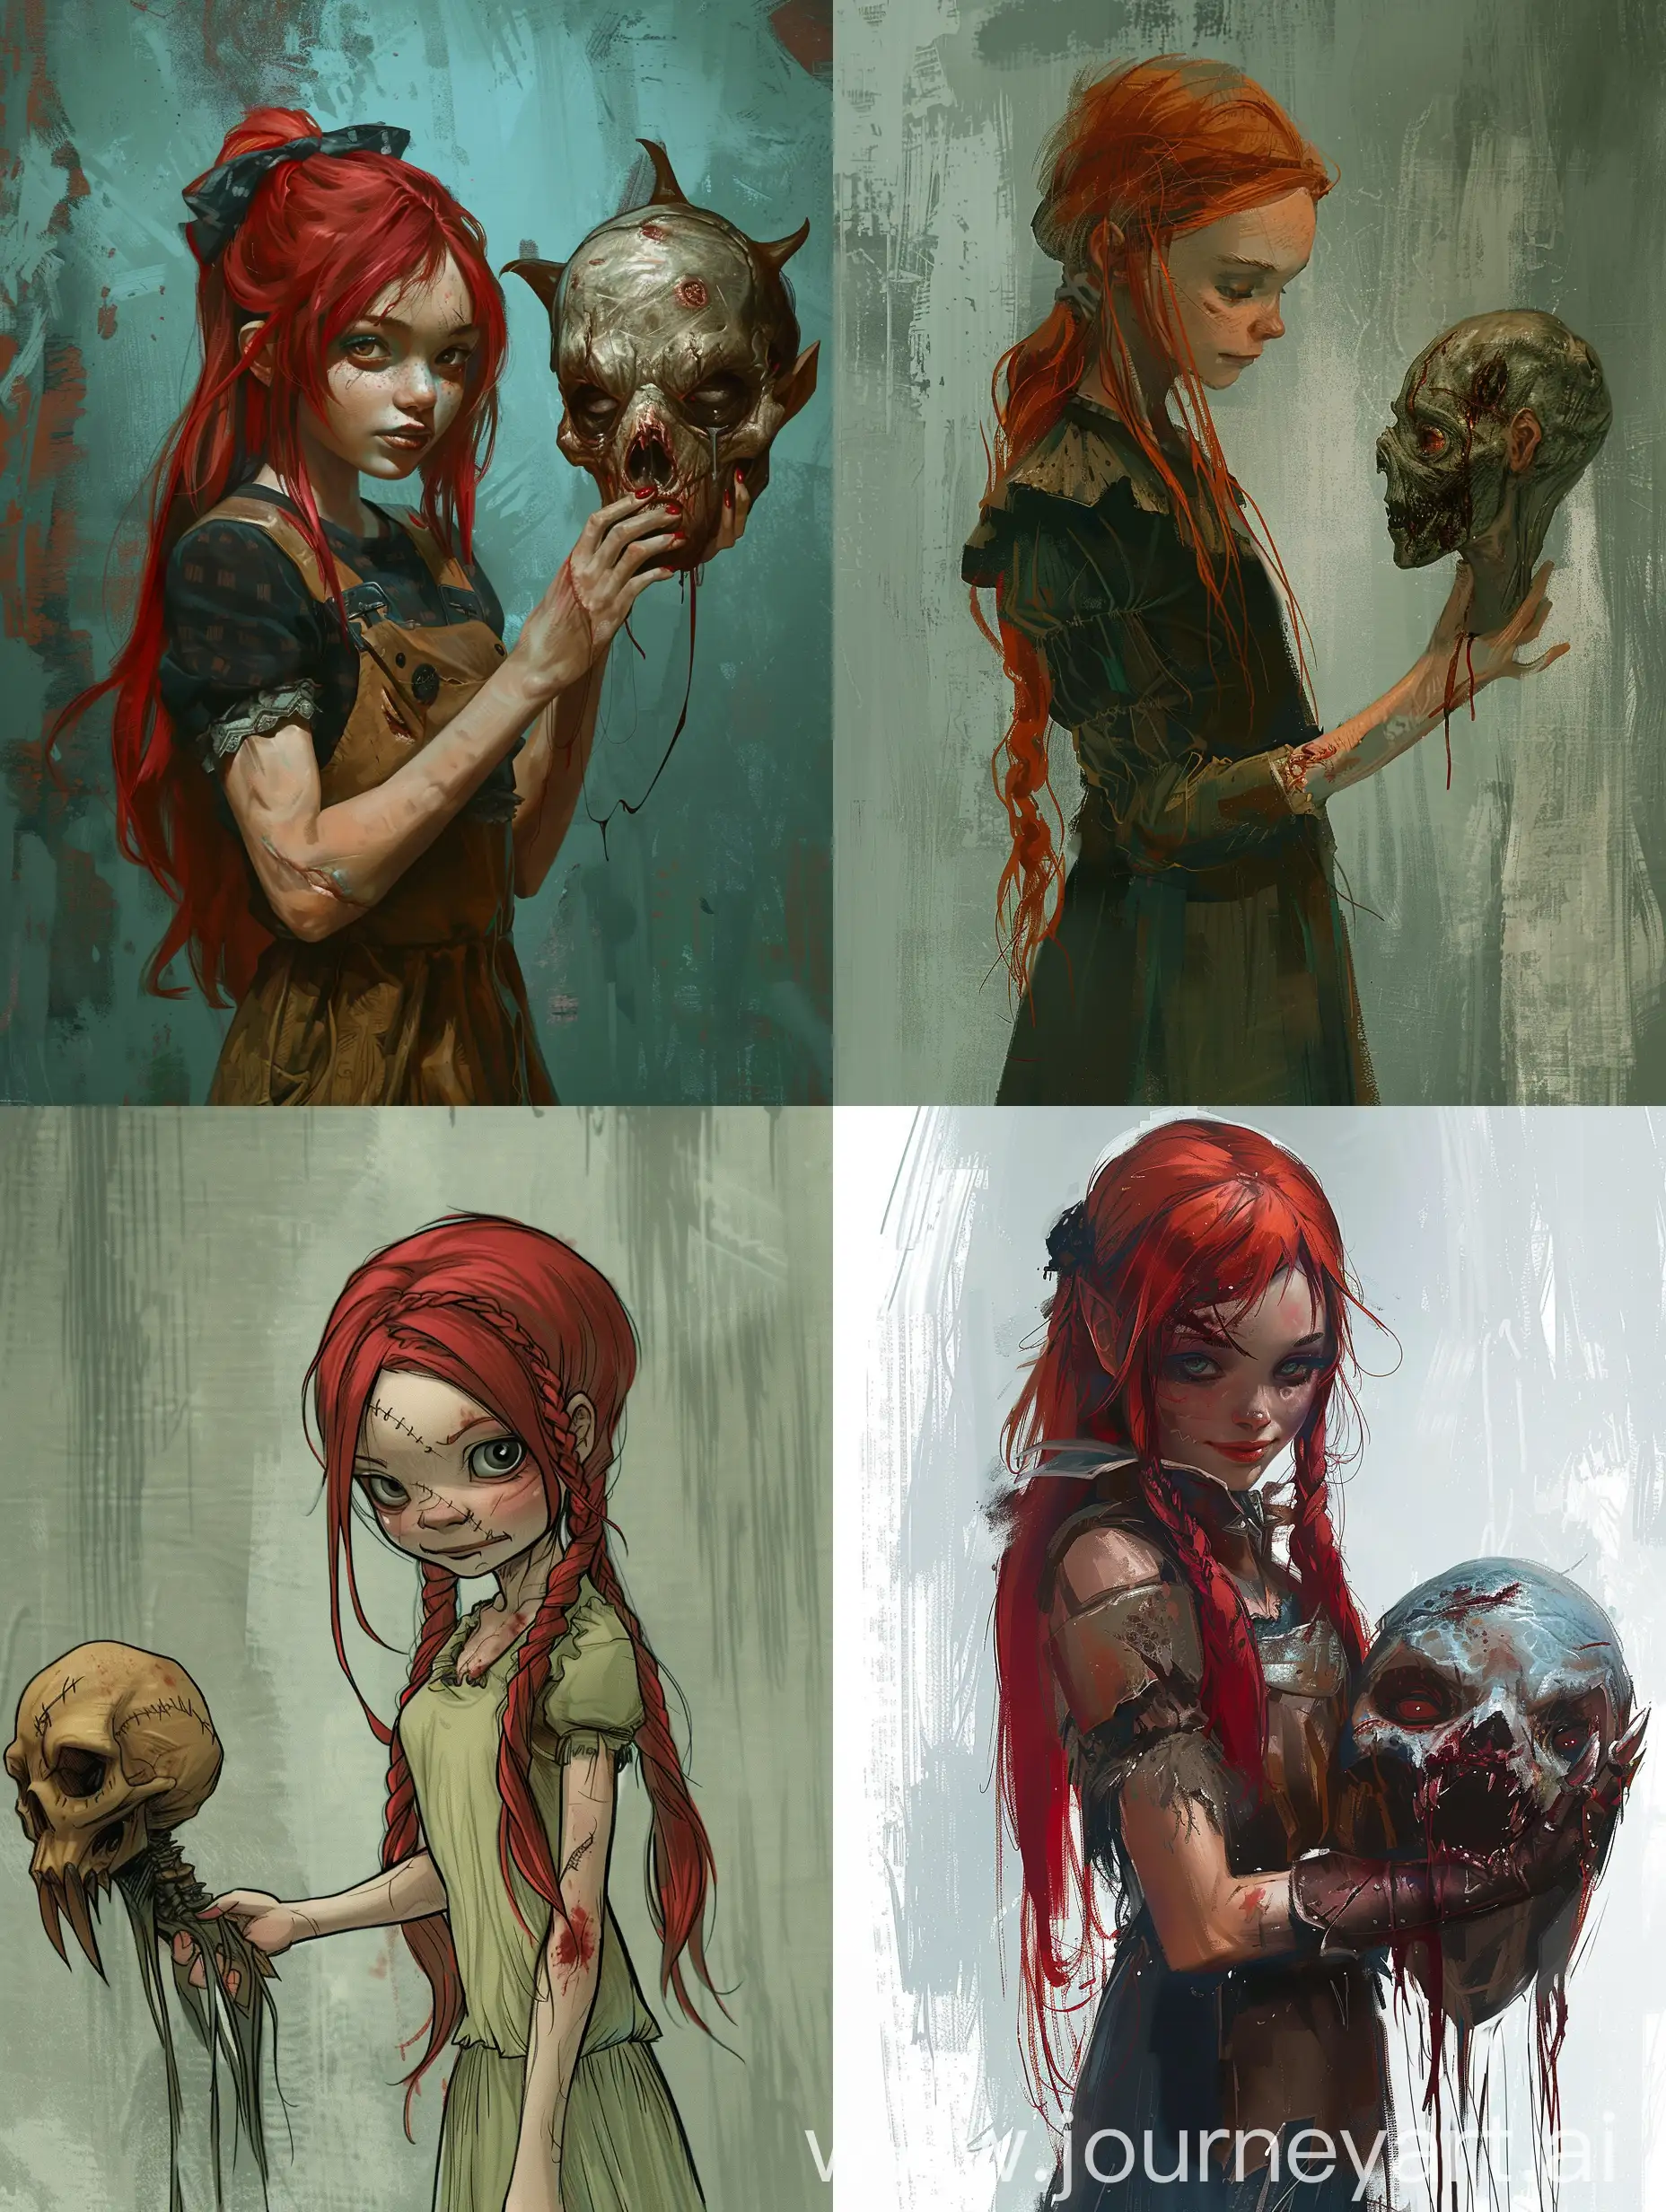 RedHaired-Girl-Holding-Ghouls-Head-Spooky-Halloween-Costume-Portrait